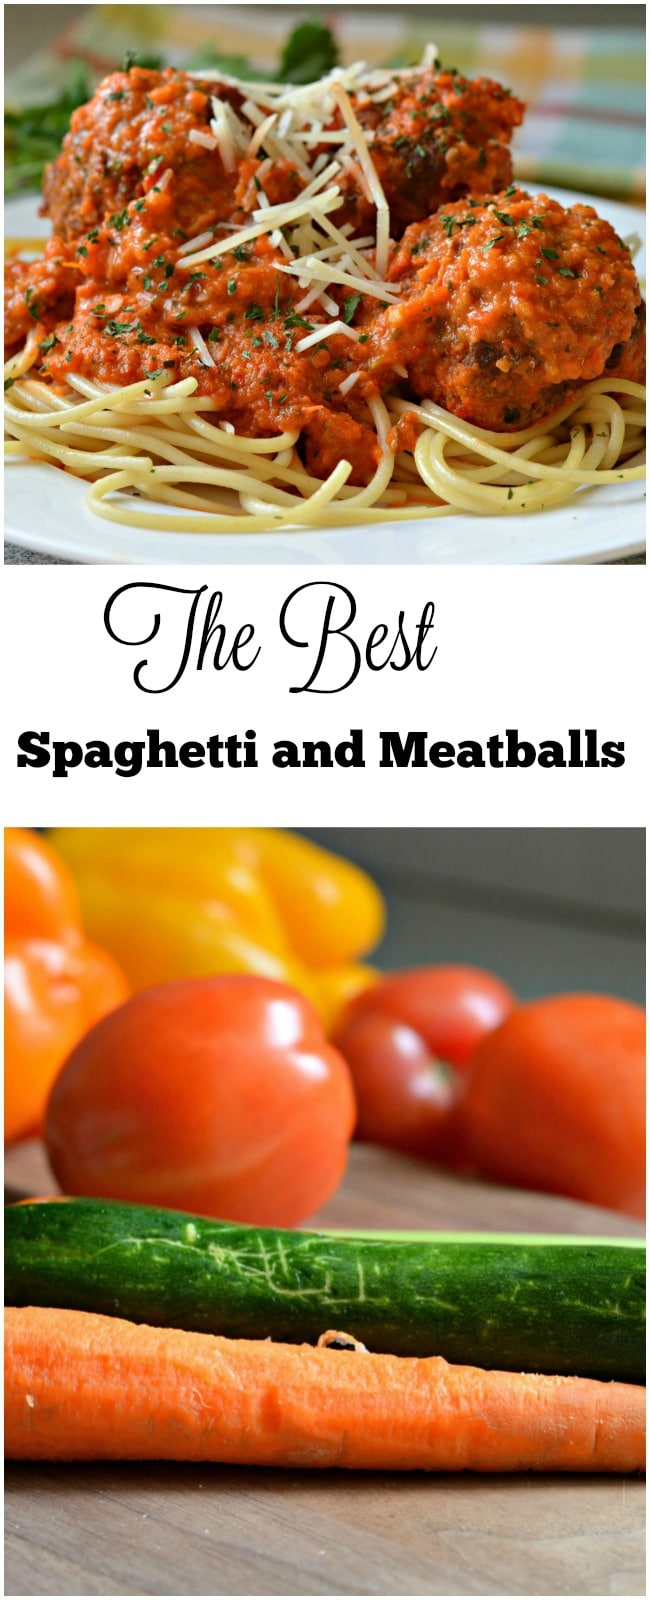 The Best Spaghetti and Meatballs - My Latina Table